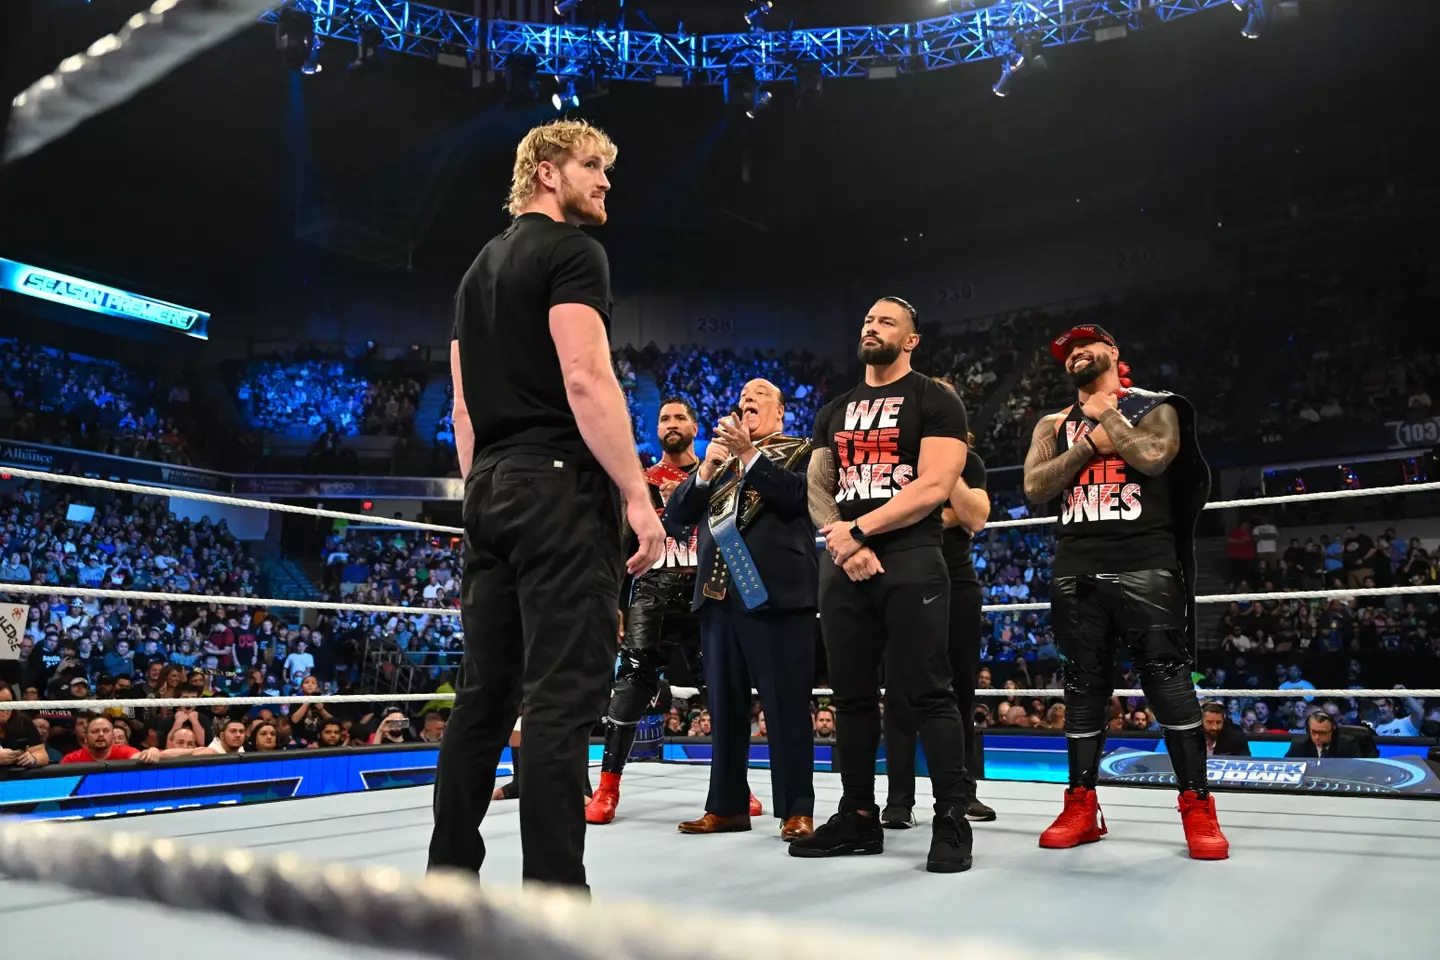 Paul facing off with The Bloodline on an episode of SmackDown. (Image